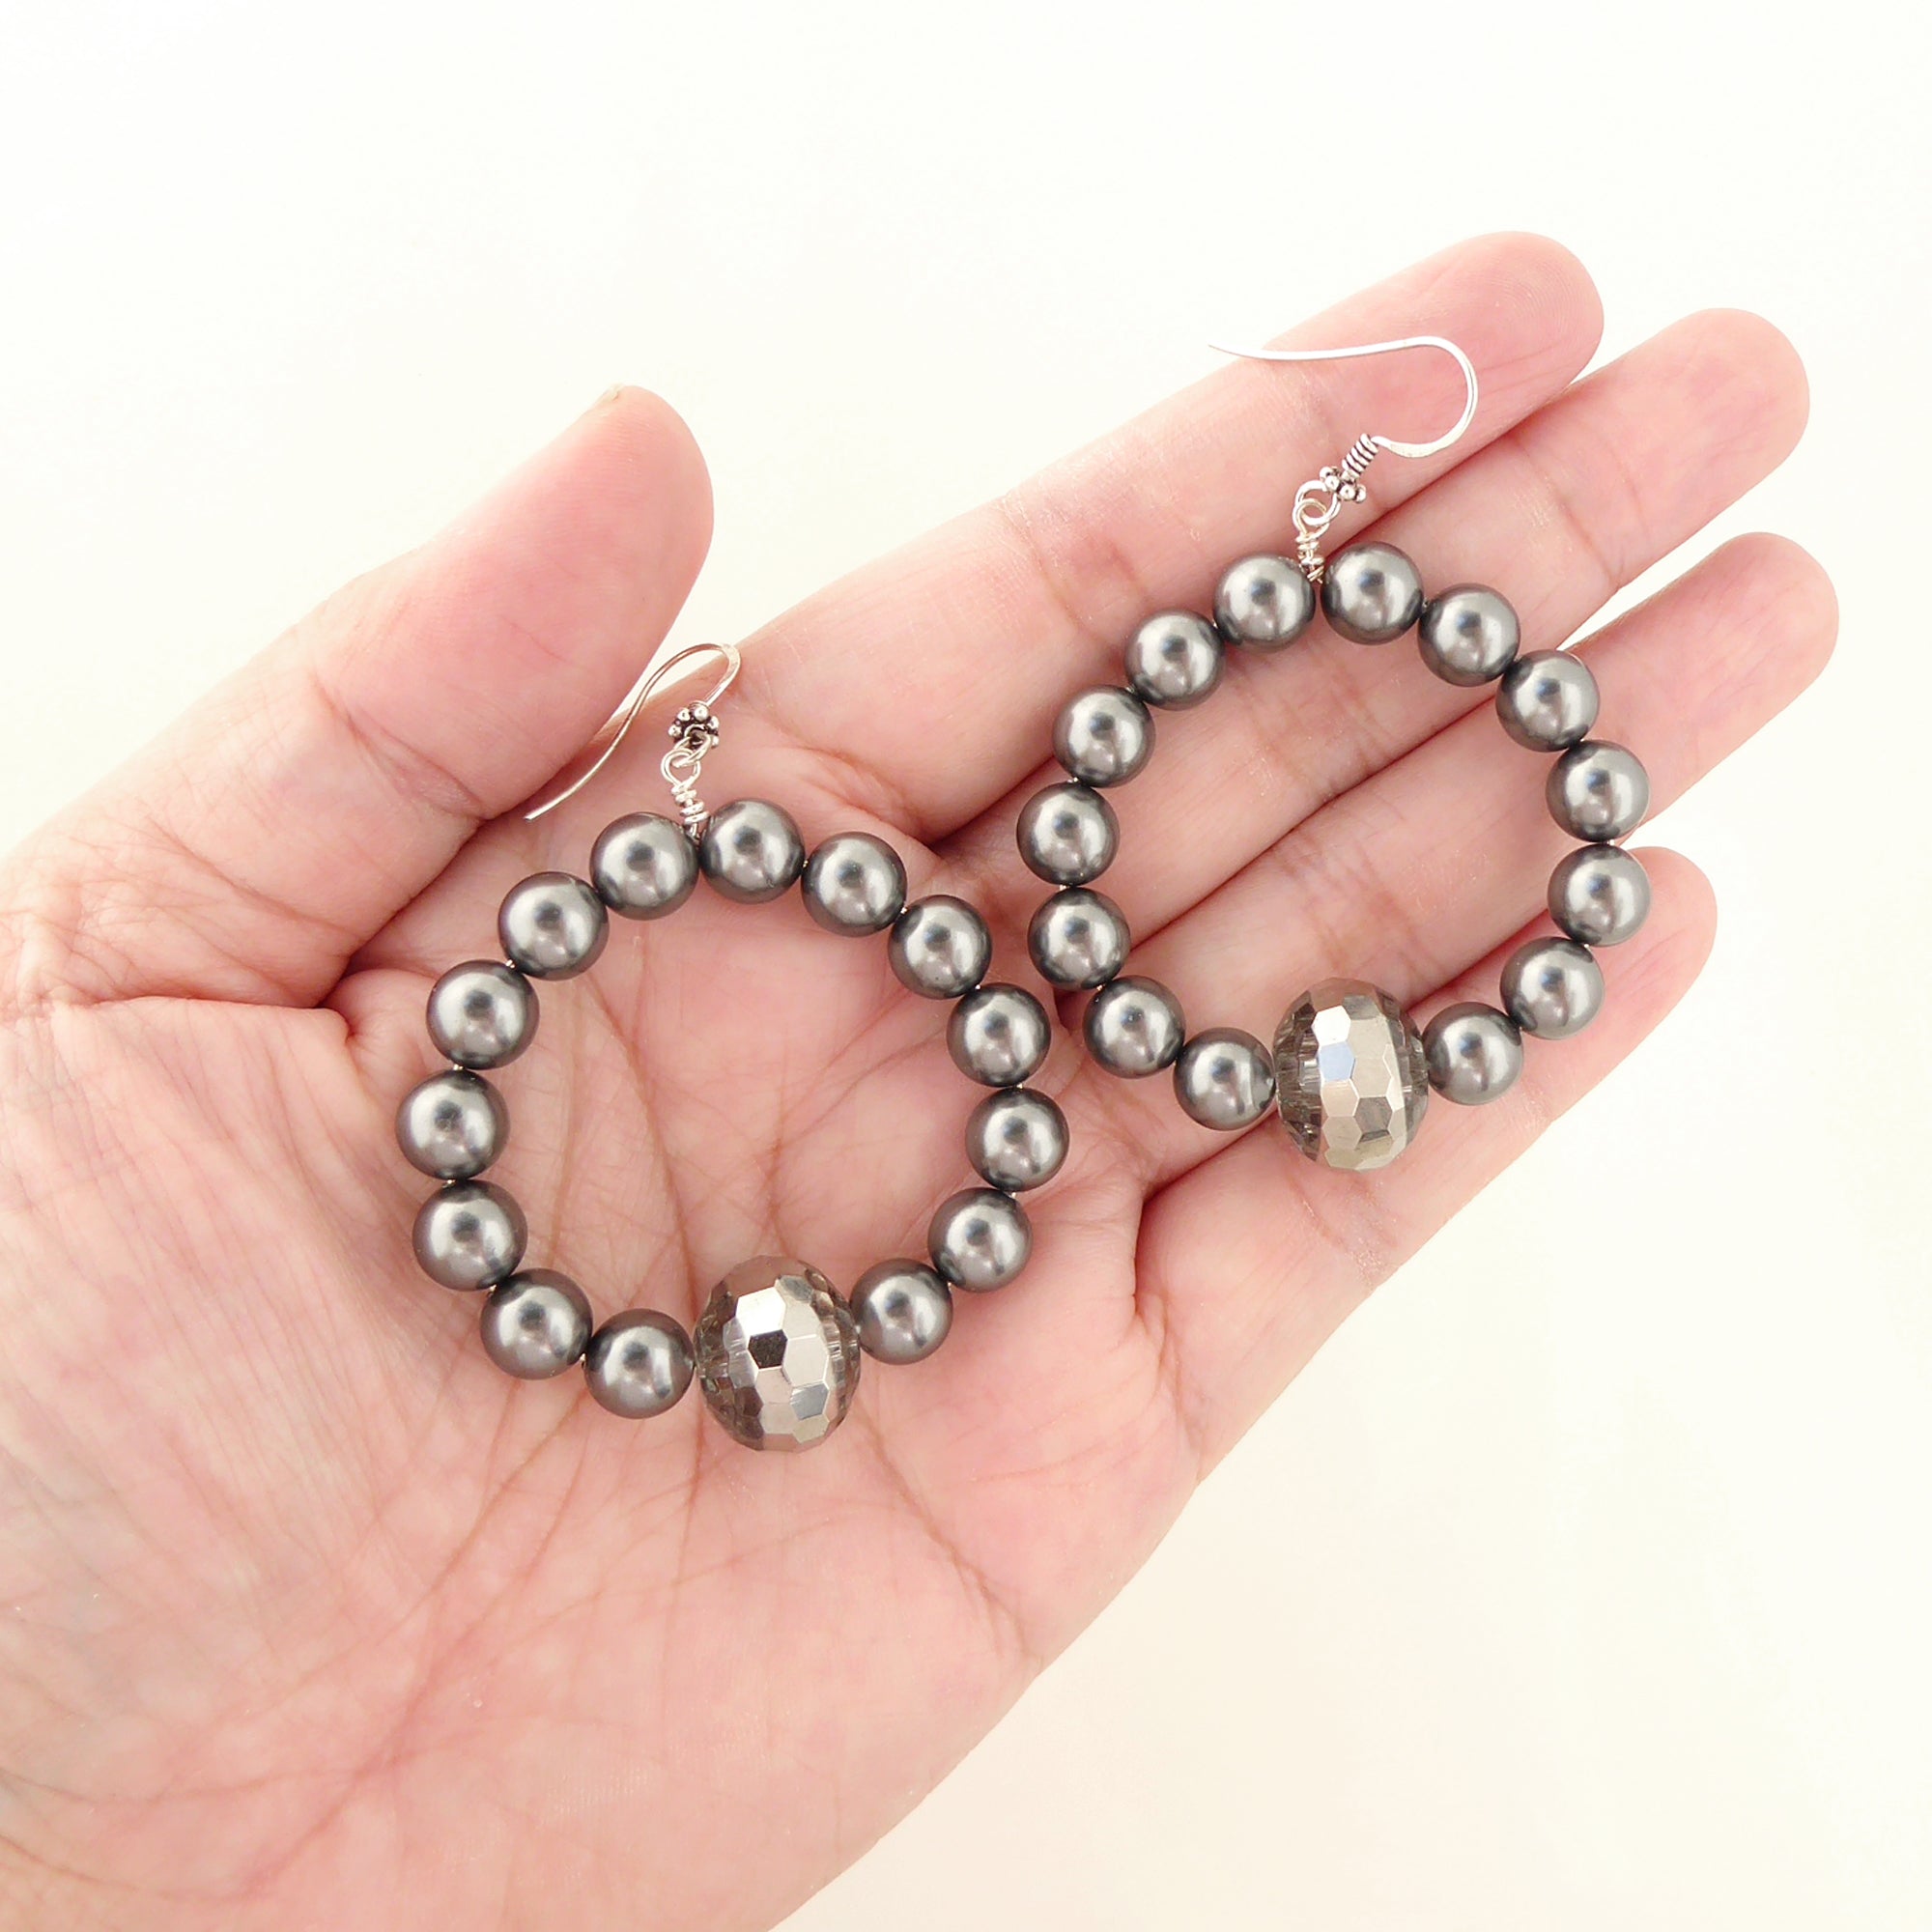 Dark gray pearl circle earrings by Jenny Dayco 4